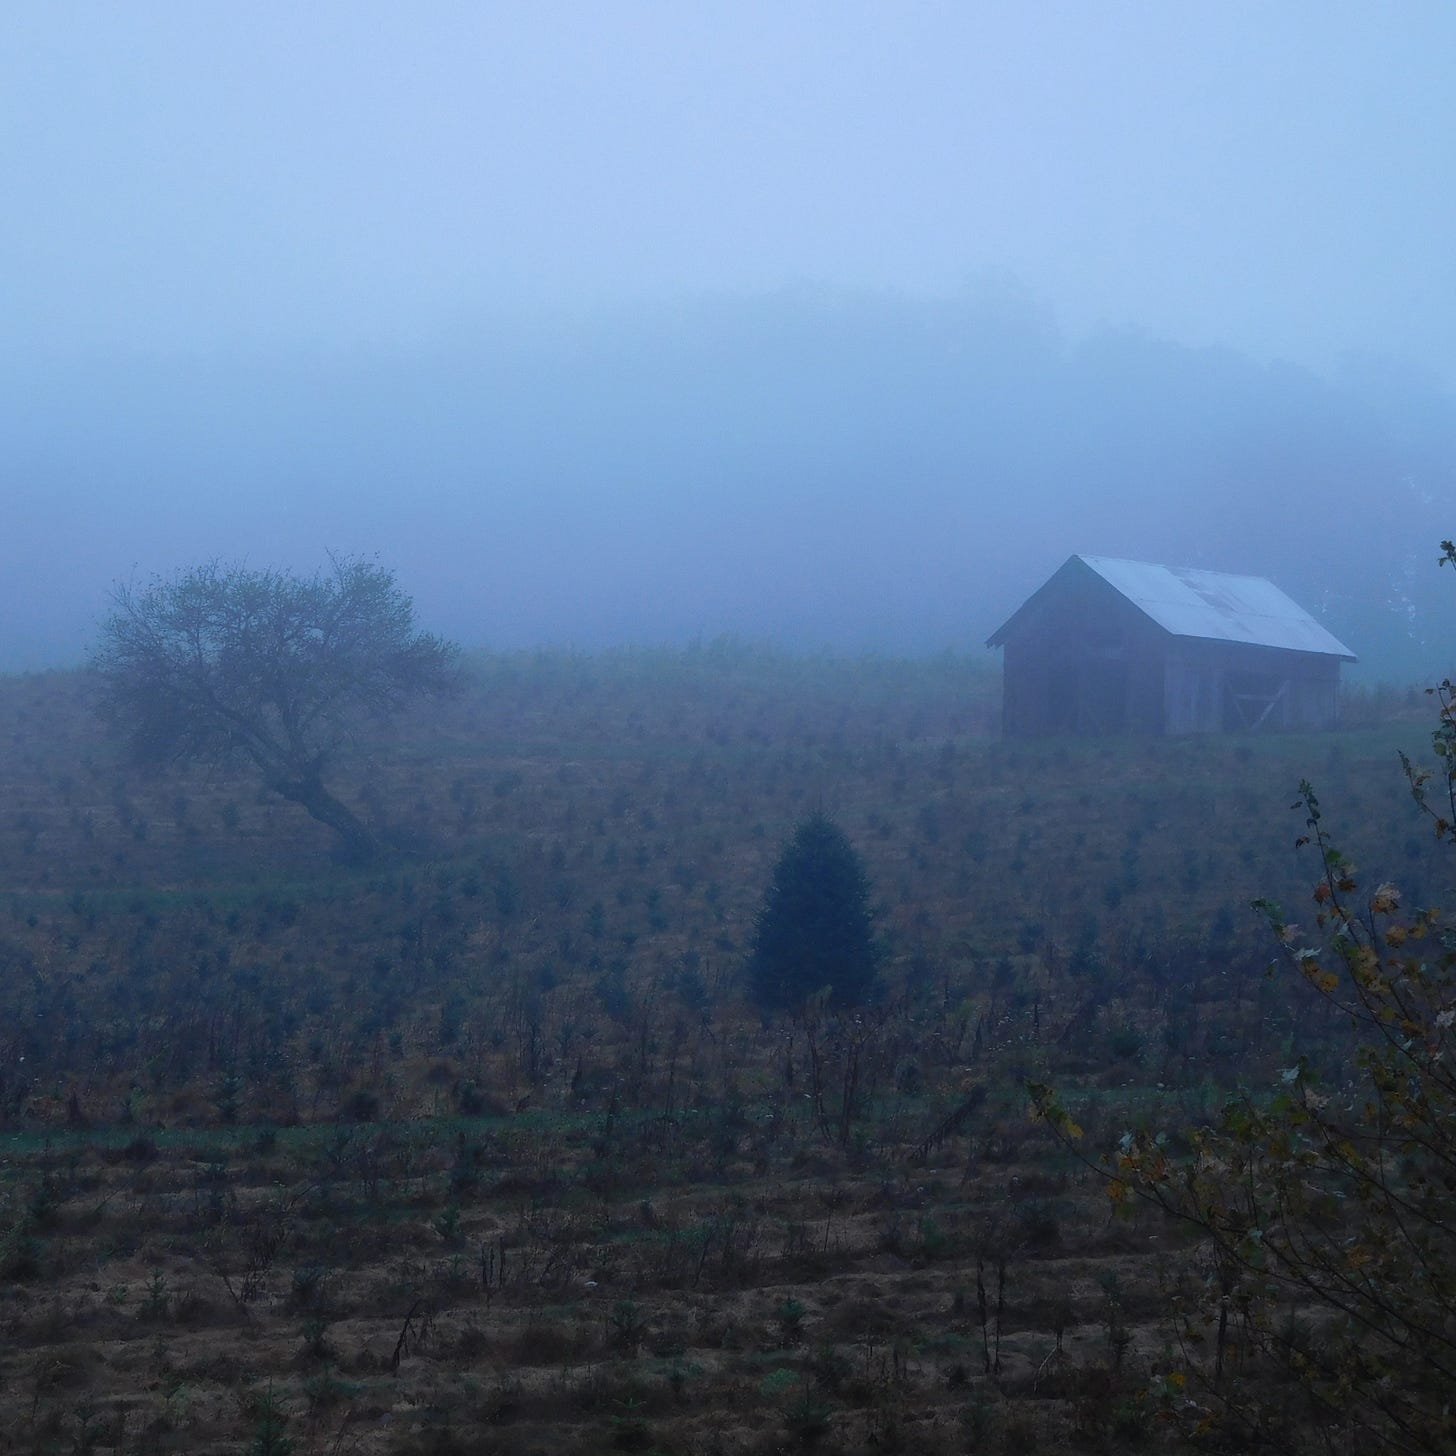 Misty field with barn and two trees in foreground, ridge barely visible behind.